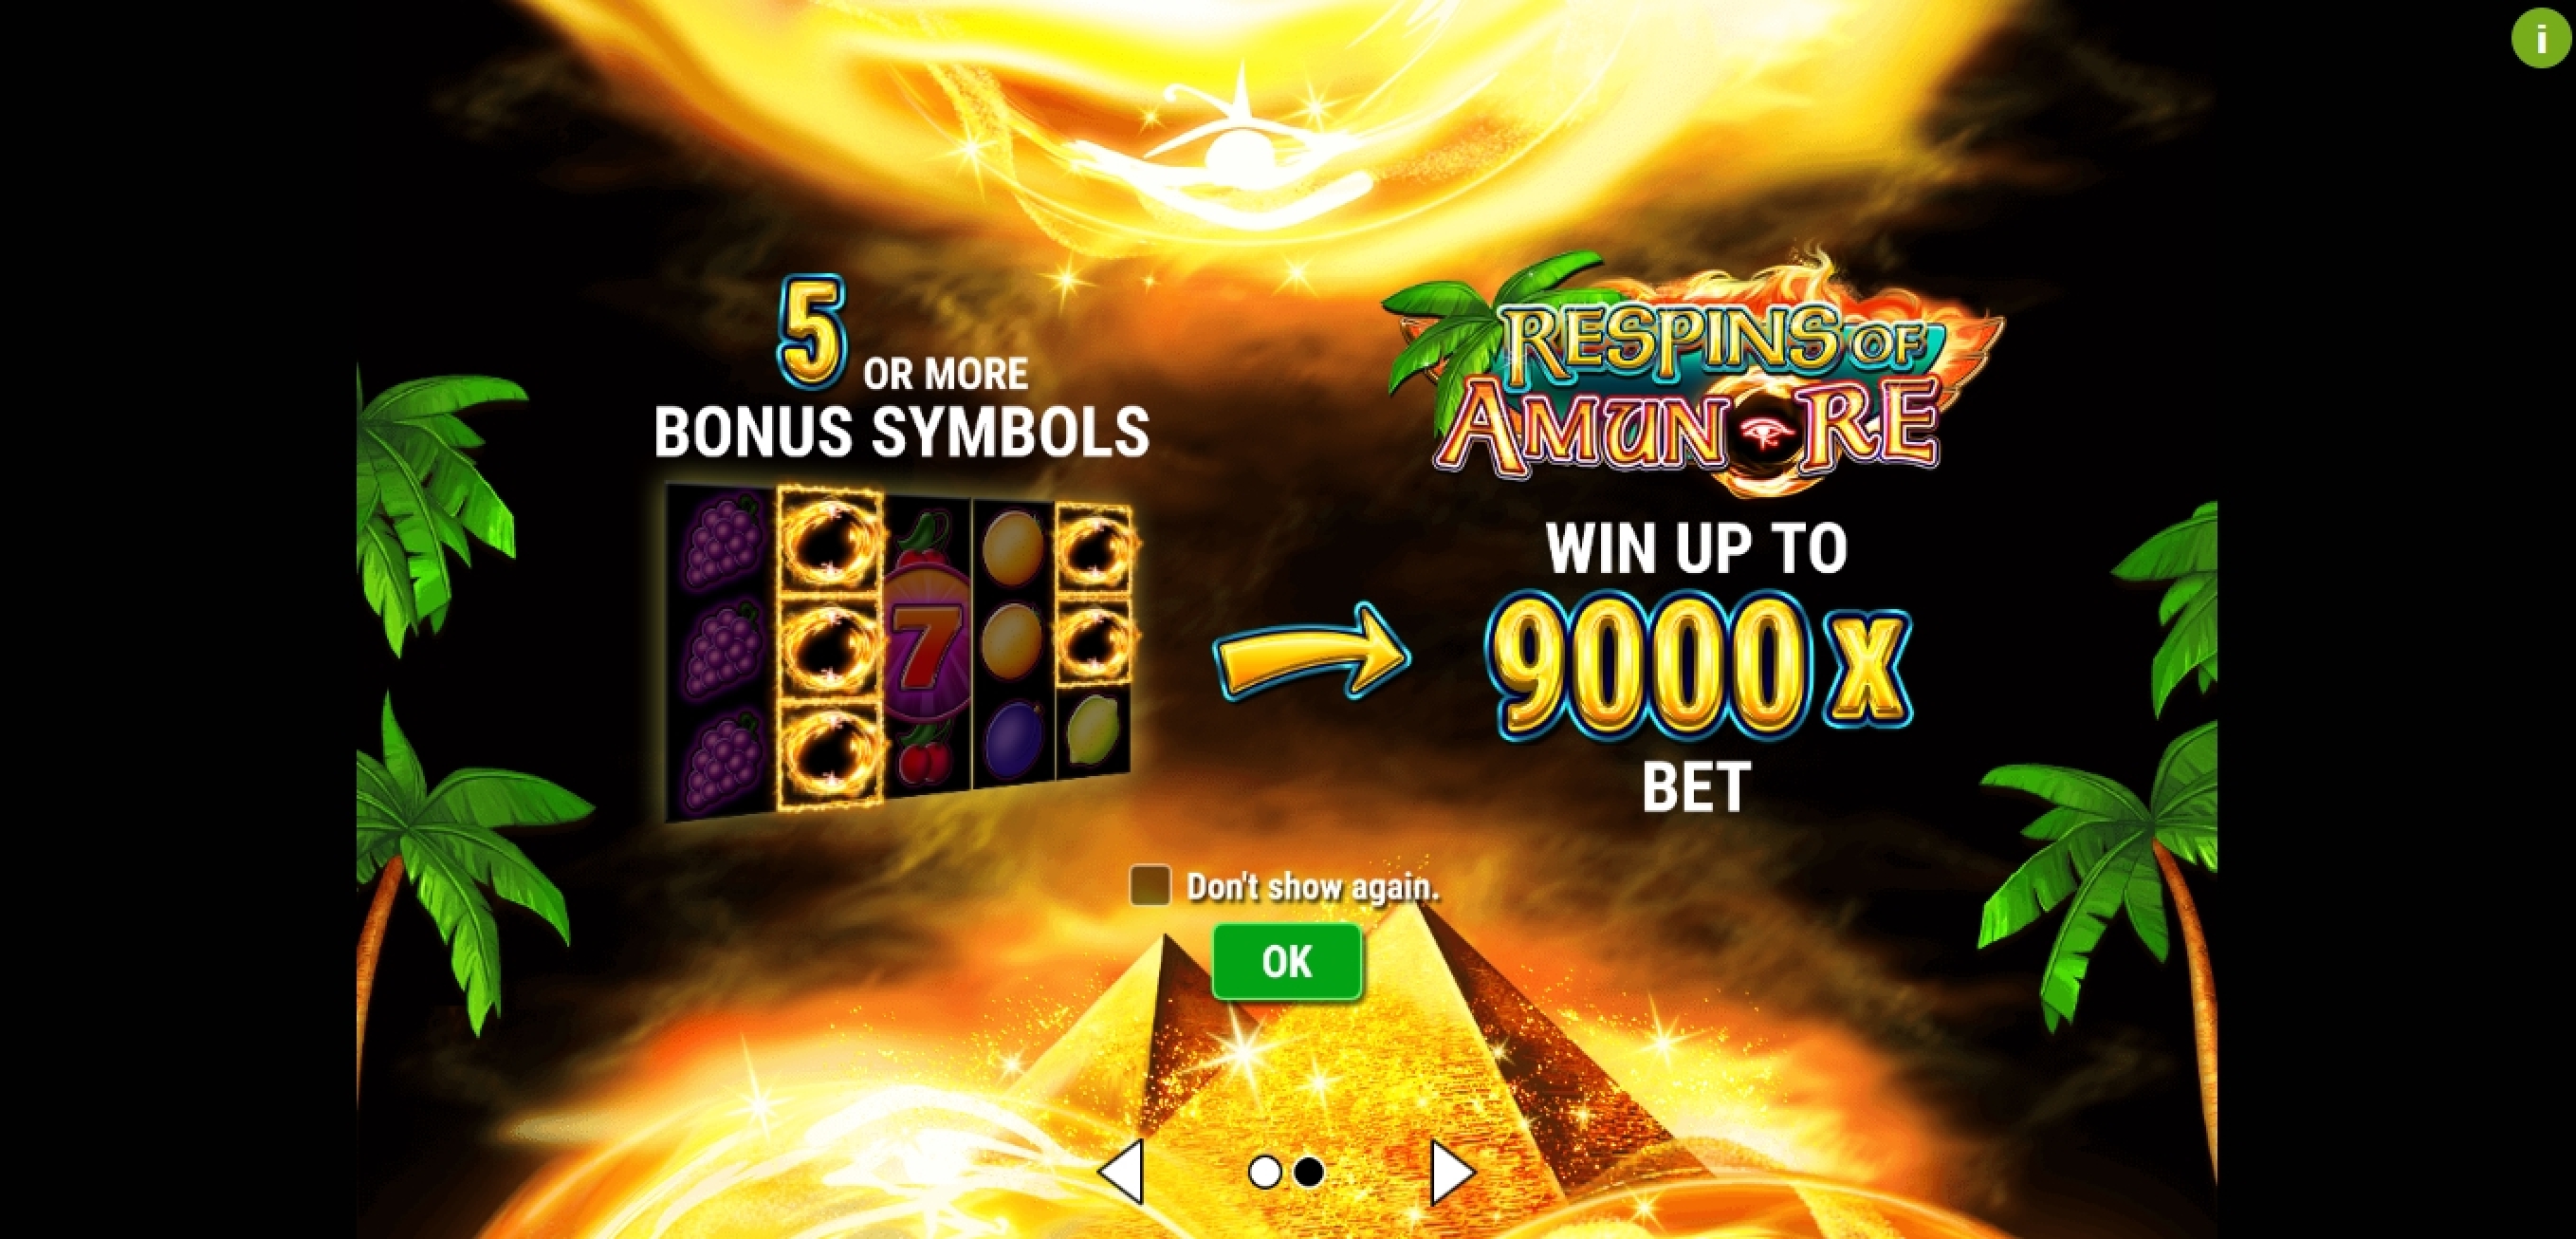 Play Fancy Fruits Respins Of Amun-Re Free Casino Slot Game by Gamomat